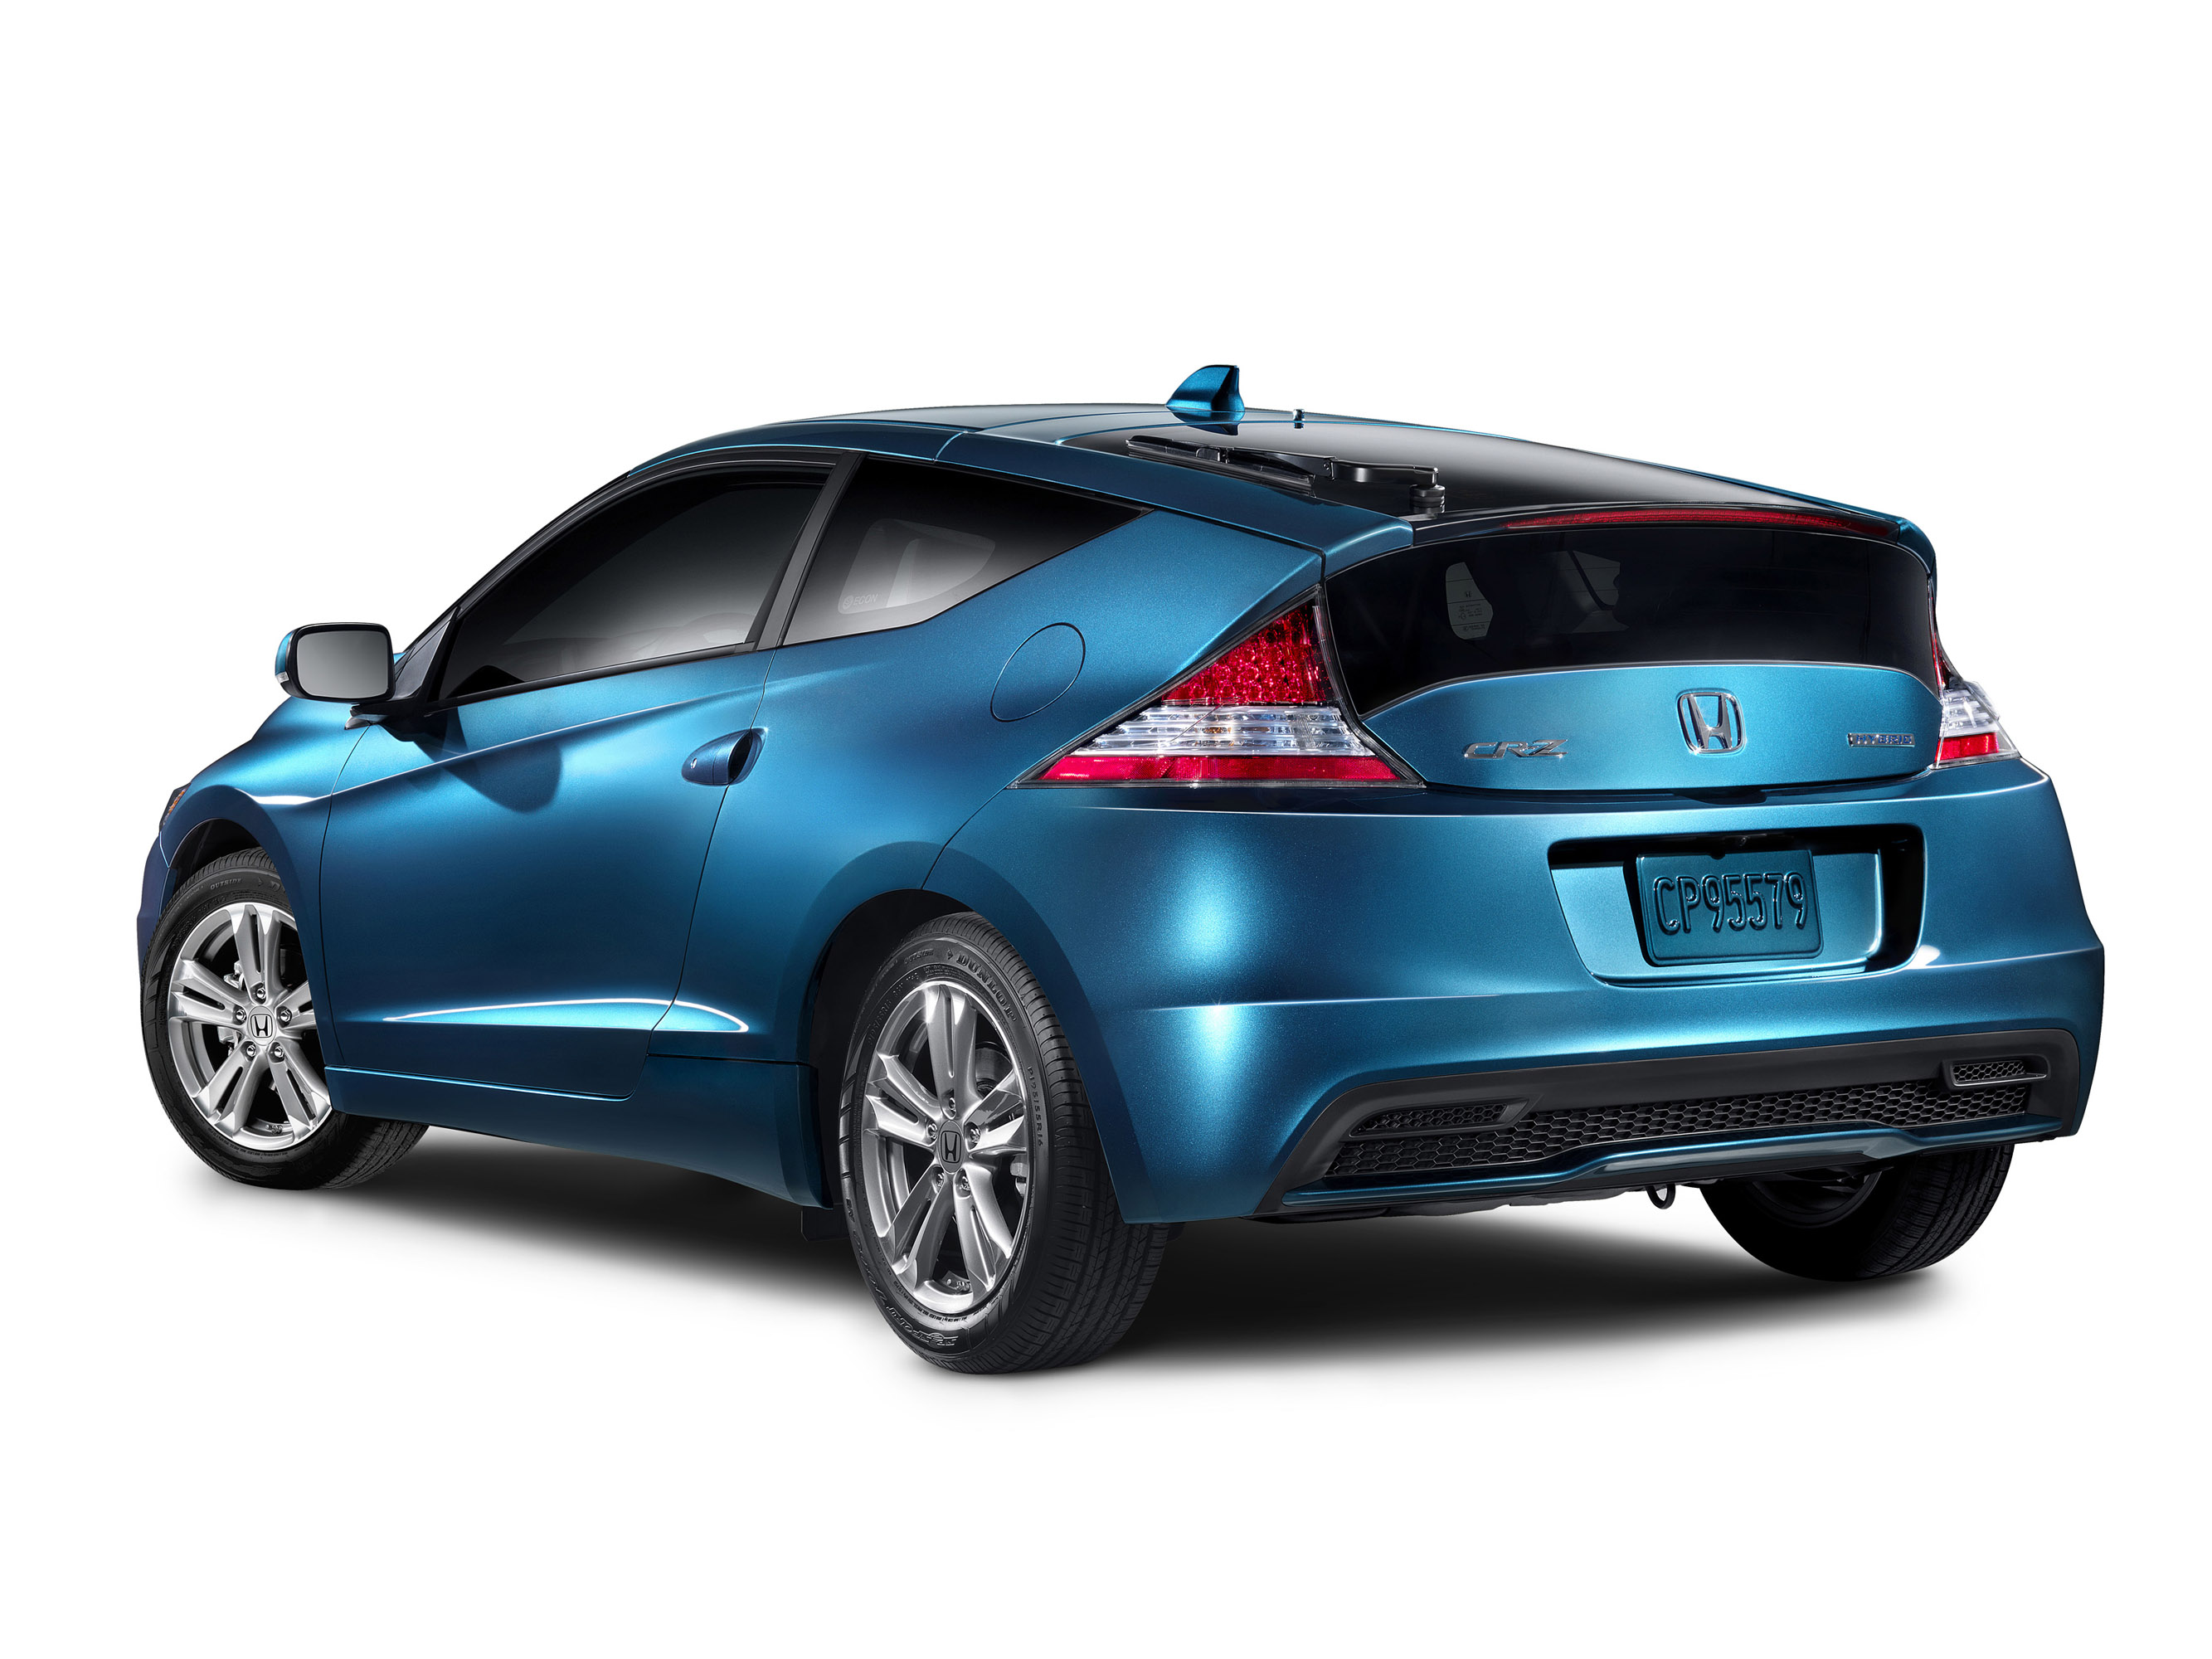 Honda CR-Z EX Navi (2014) - 20 HD pictures of this model. 